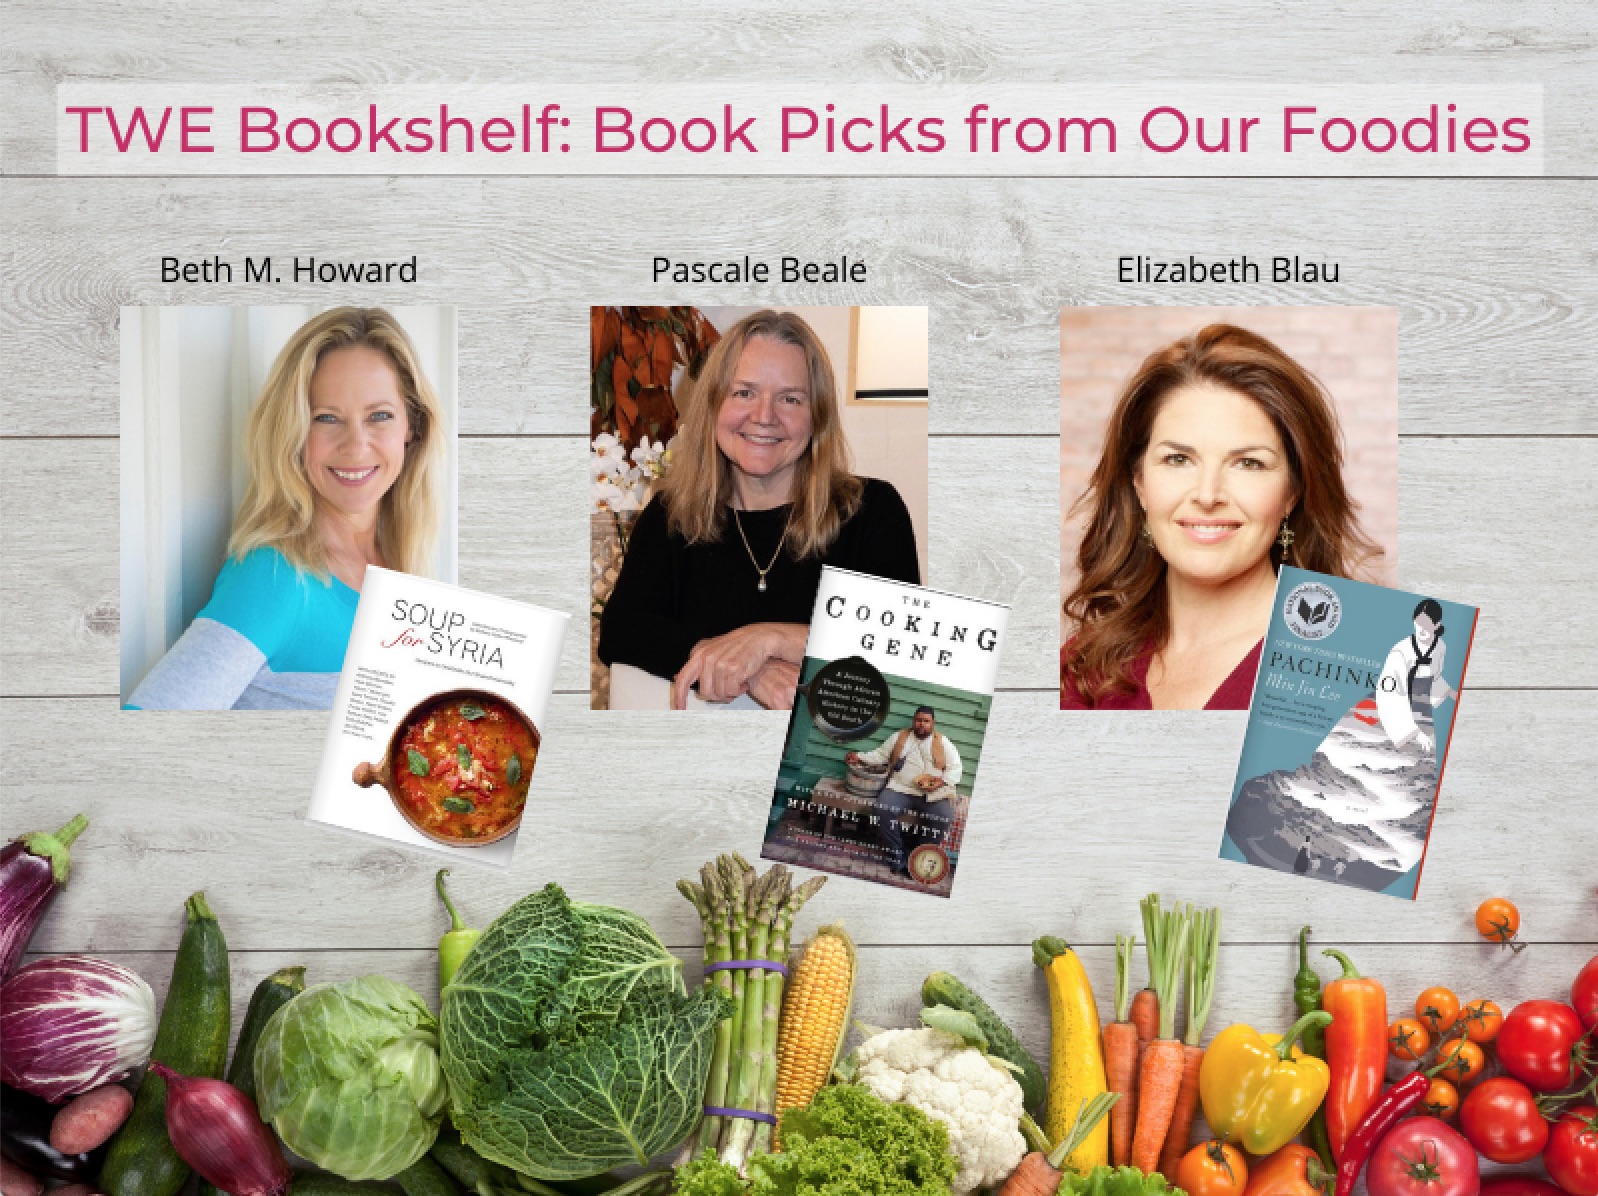 TWE Bookshelf: Book Picks from Our Foodies: Beth M. Howard (author of Ms. American Pie and Making Piece) picked Soup for Syria by Barbara Abdeni Massaad; Pascale Beal (award-winnnig food and cookbook writer, author of Salade I and Salad II) chose The Cooking Gene by Michael W. Twitty; and Elizabeth Blau (James Beard Award Nominee and author of Honey Salt) chose Pachinko by Min Lin Lee | The Women's Eye